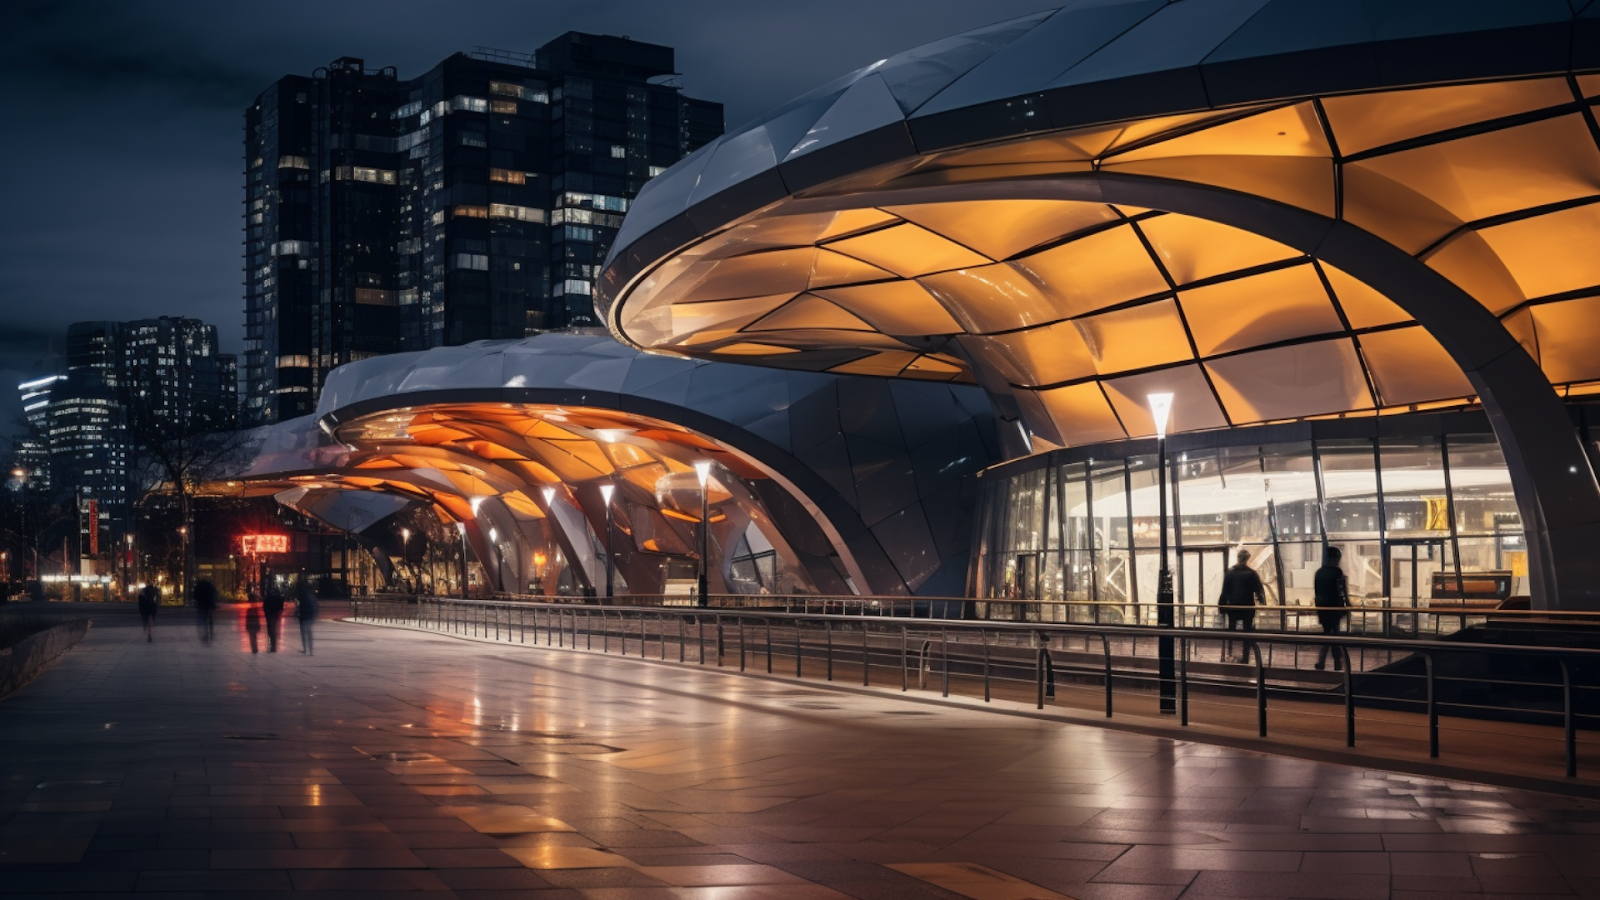 Futuristic urban pavilion in city lights at night, highlighting the innovative architectural design of the 20th century.